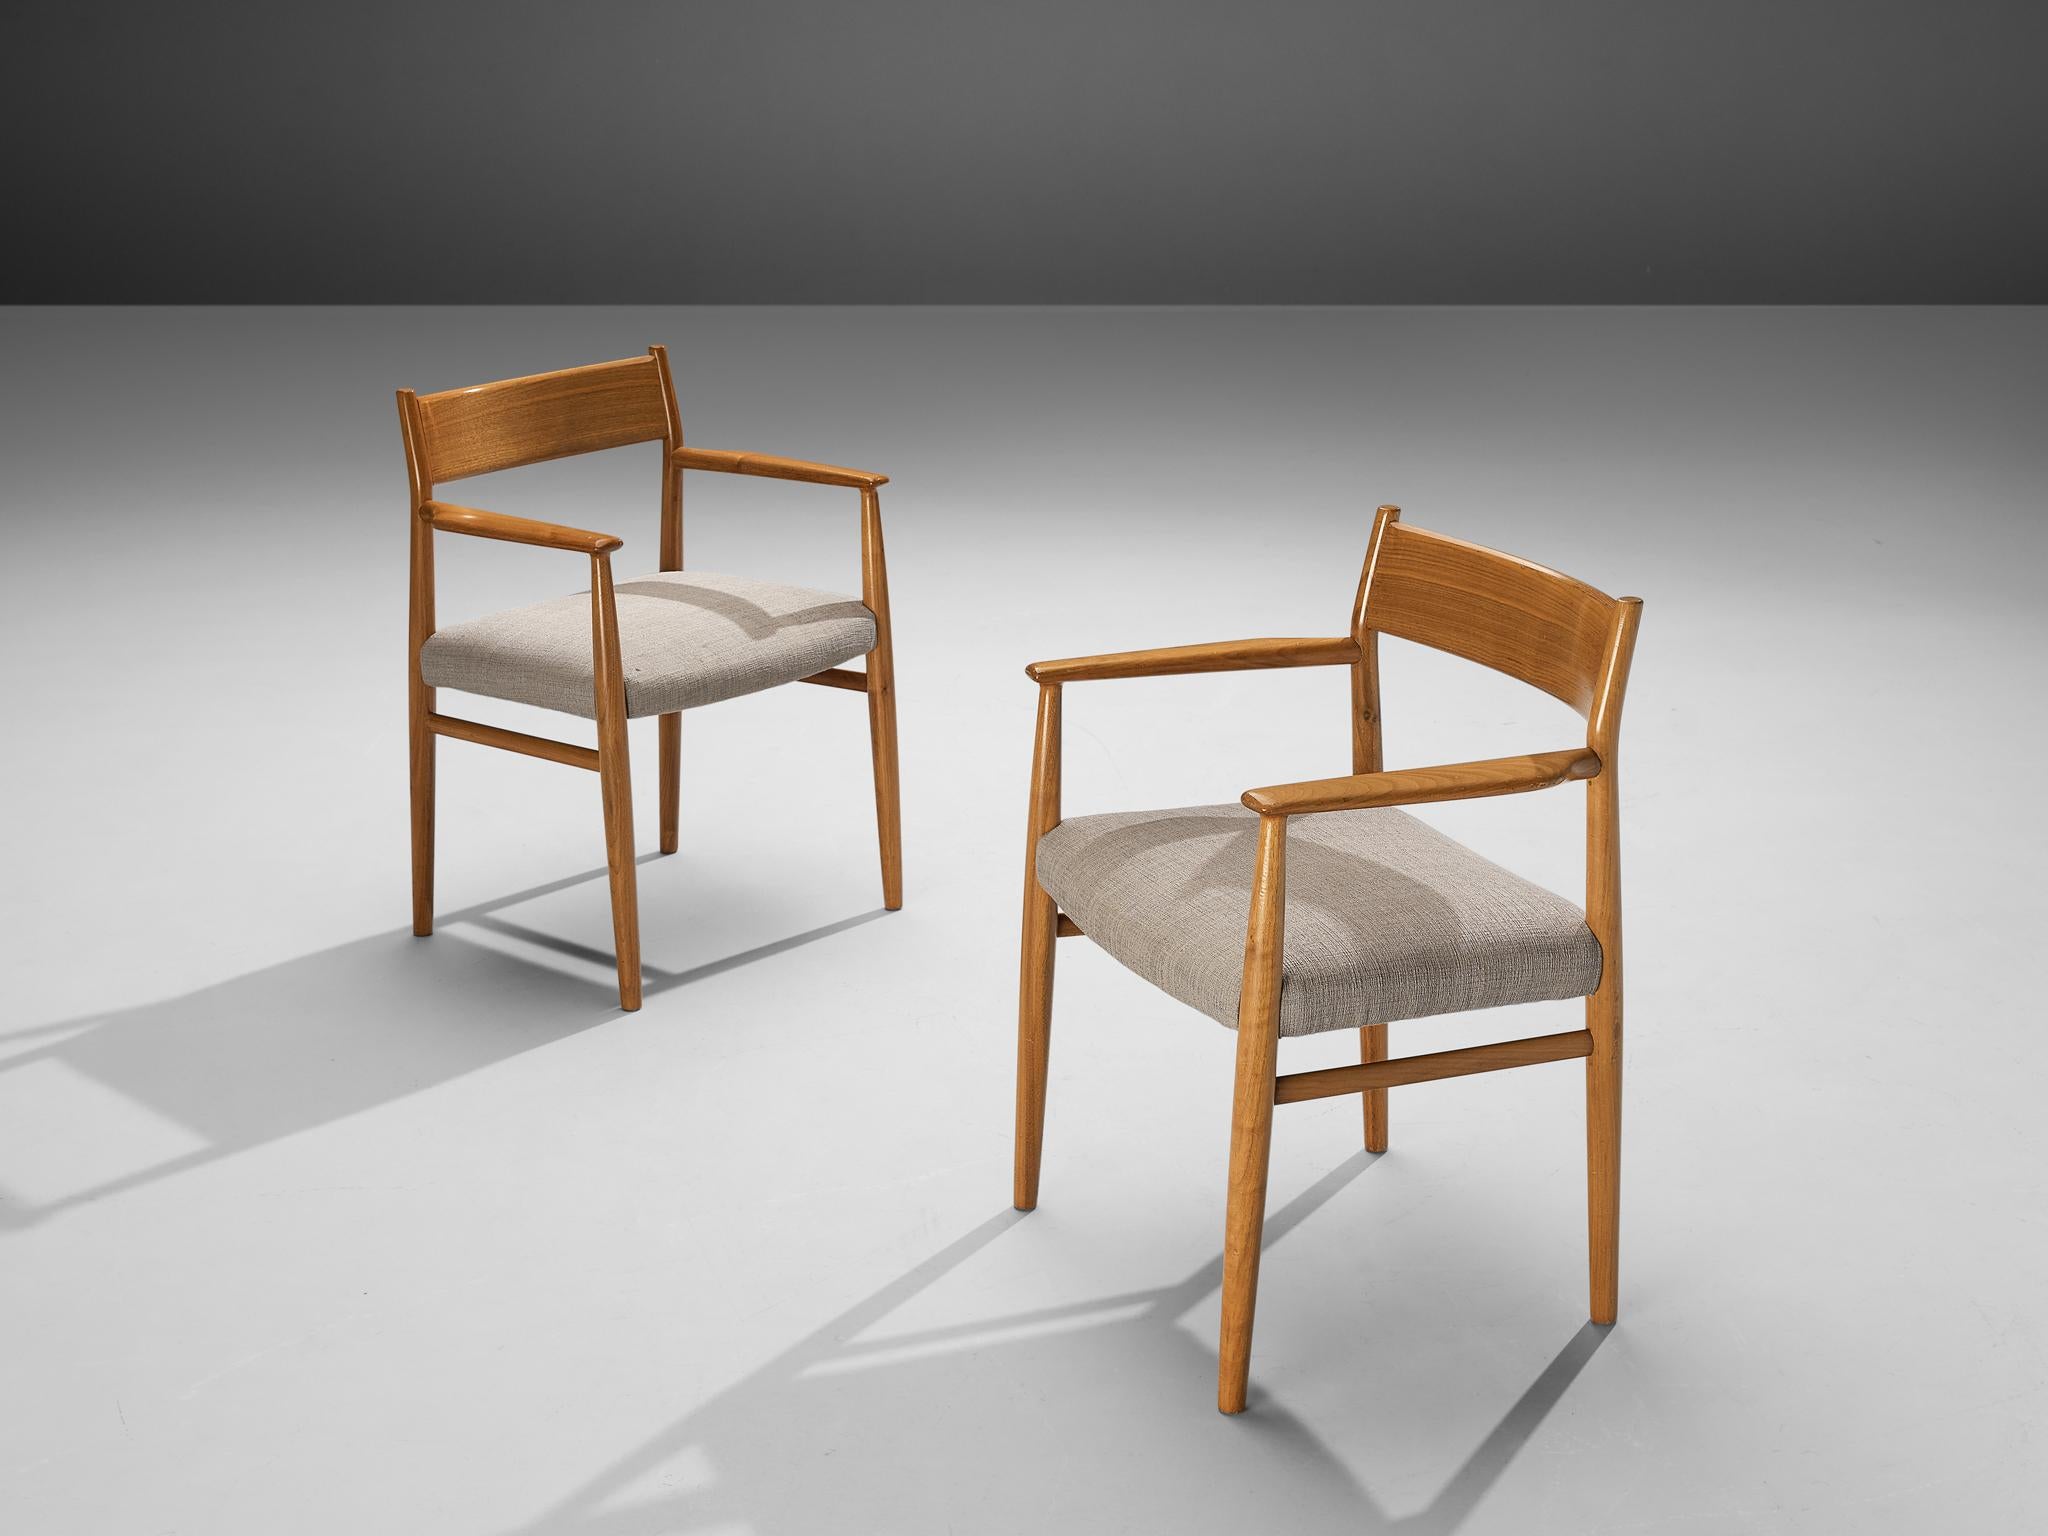 Arne Vodder for Sibast Møbler, pair of dining chairs model '418', walnut, fabric, Denmark, 1960s

This model has a characteristic, sculptural frame executed in warm walnut. The slightly tapered legs with round finishes create an overall sturdy